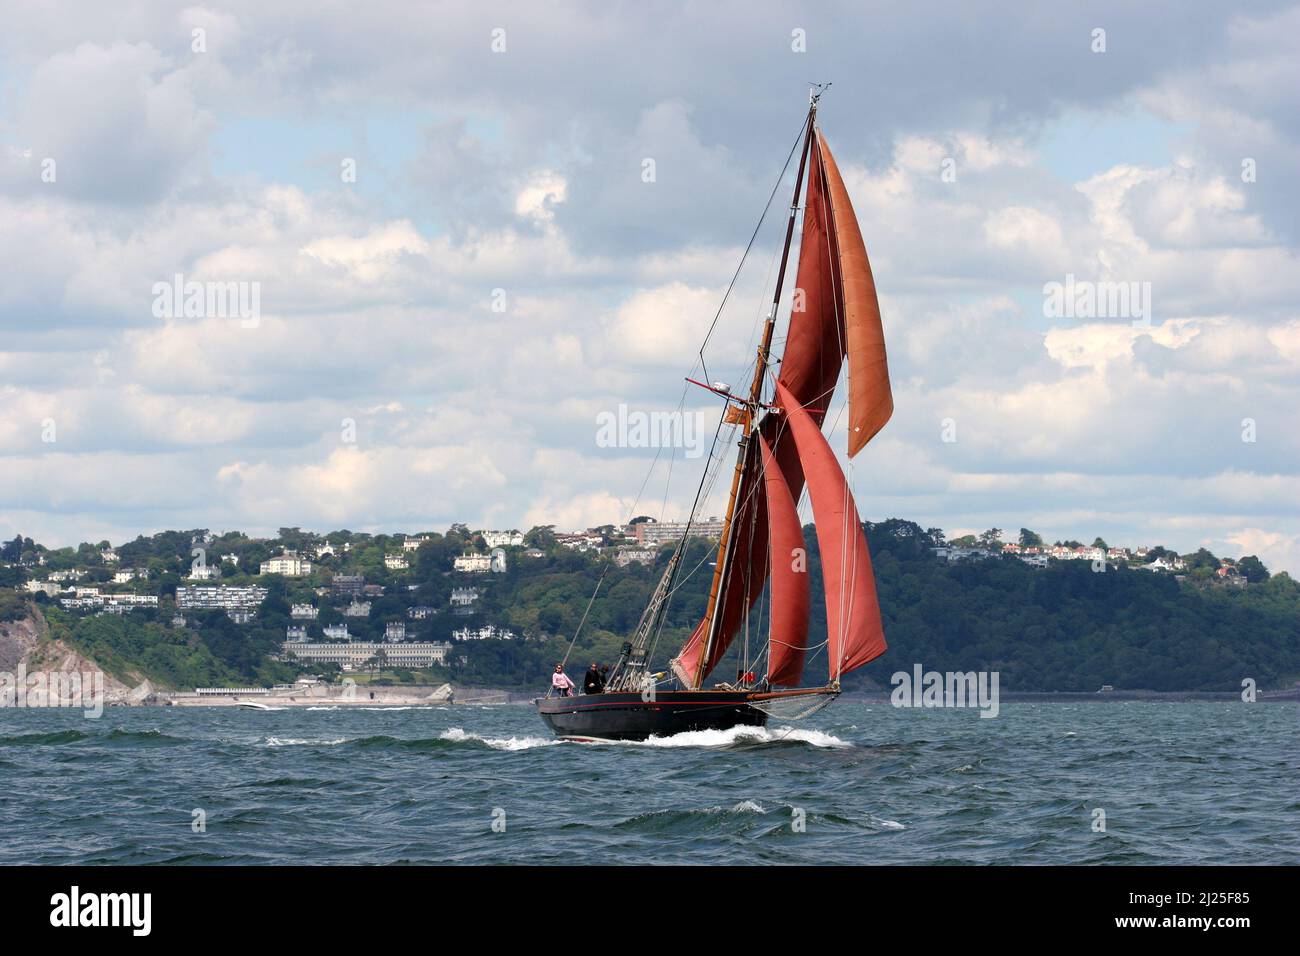 Pilot Cutter Jolie Brise in the 2007 Small Ships race, off Torbay Stock Photo